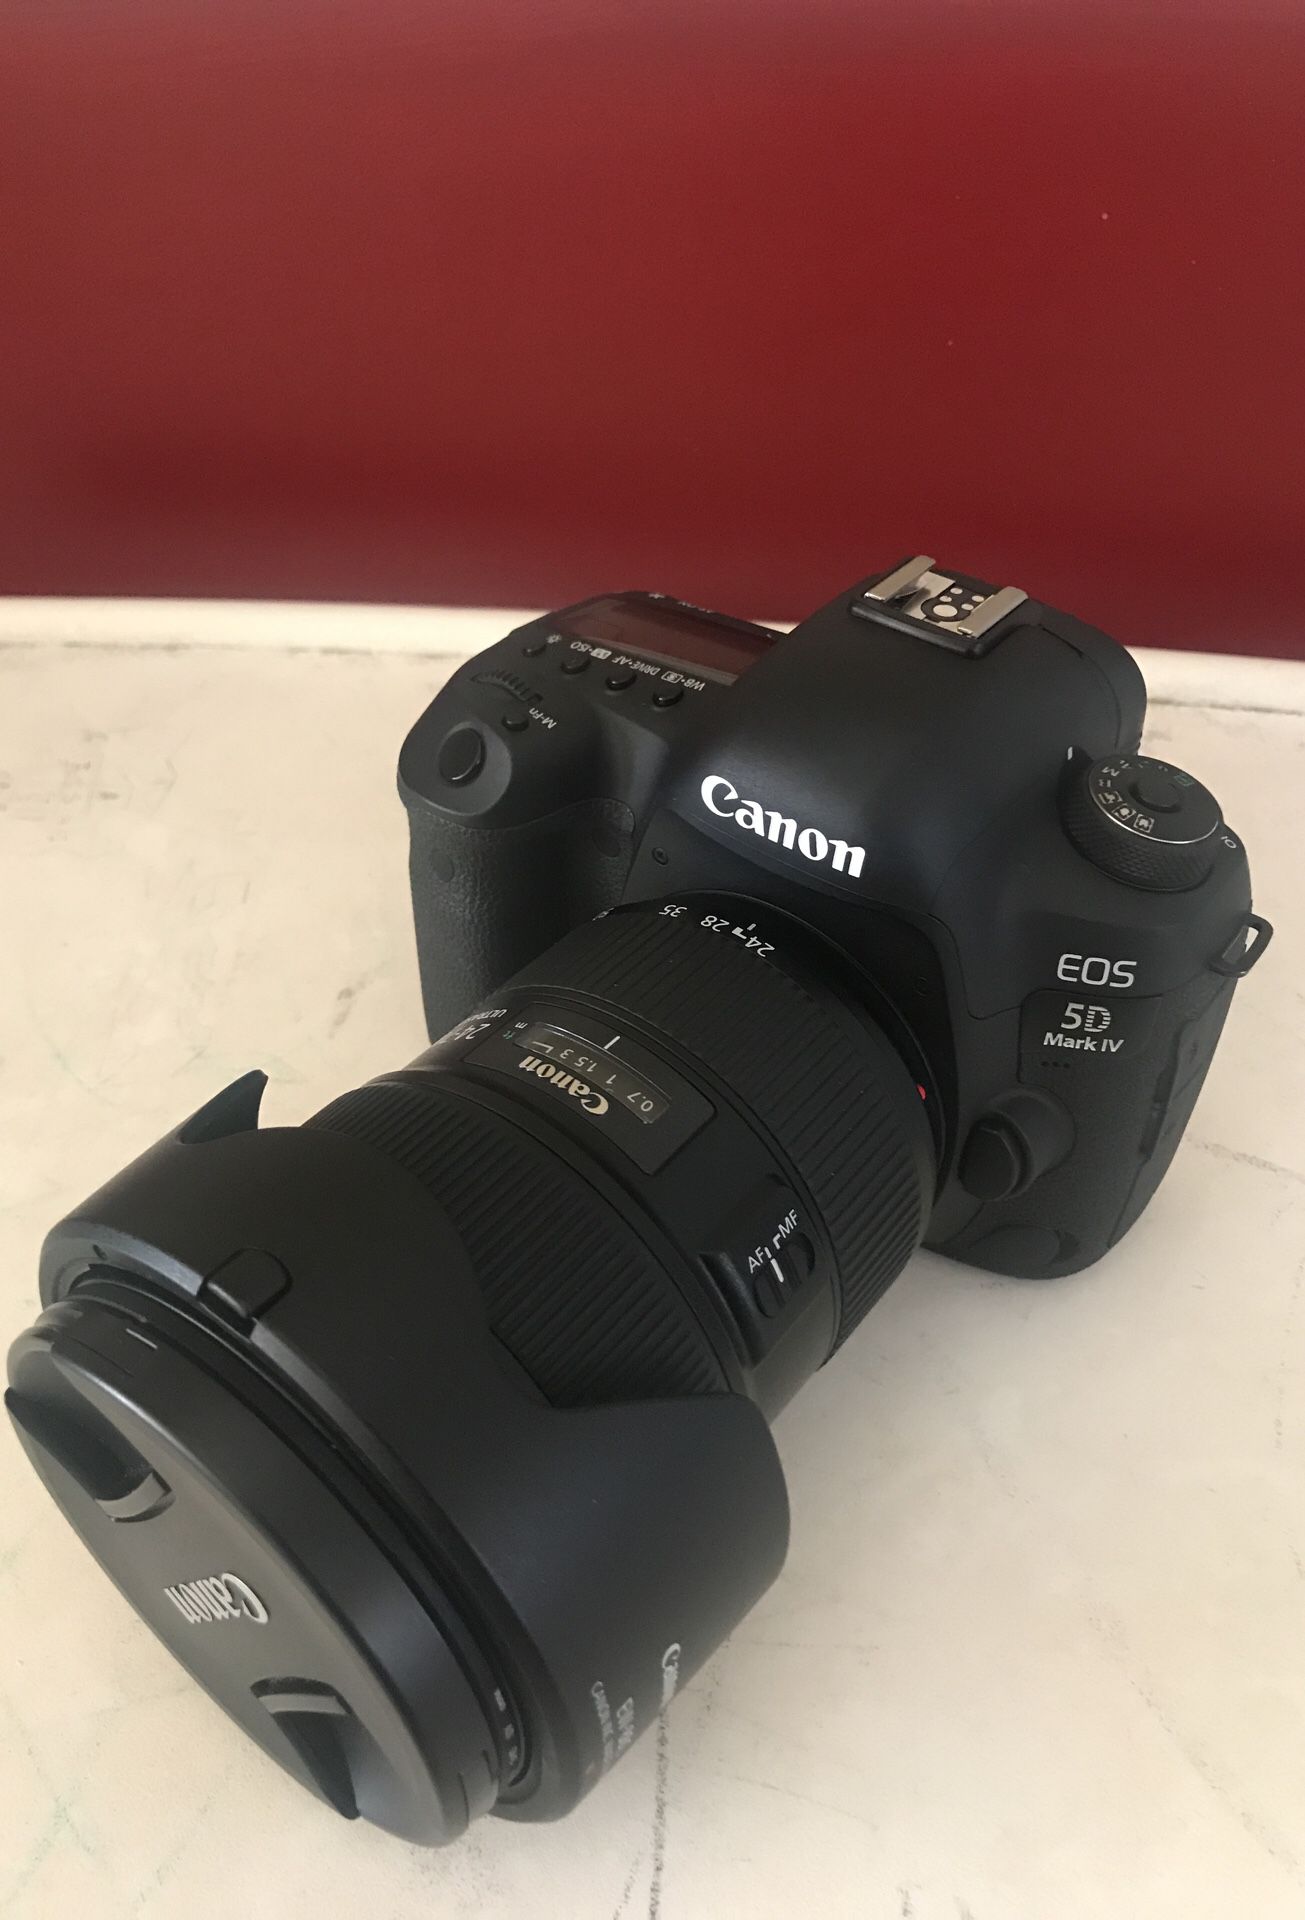 Canon 5D M IV W/20-70 f2.8 and 70-200 f2.8 L IS II USM with battery grip and 32G CIF Card.